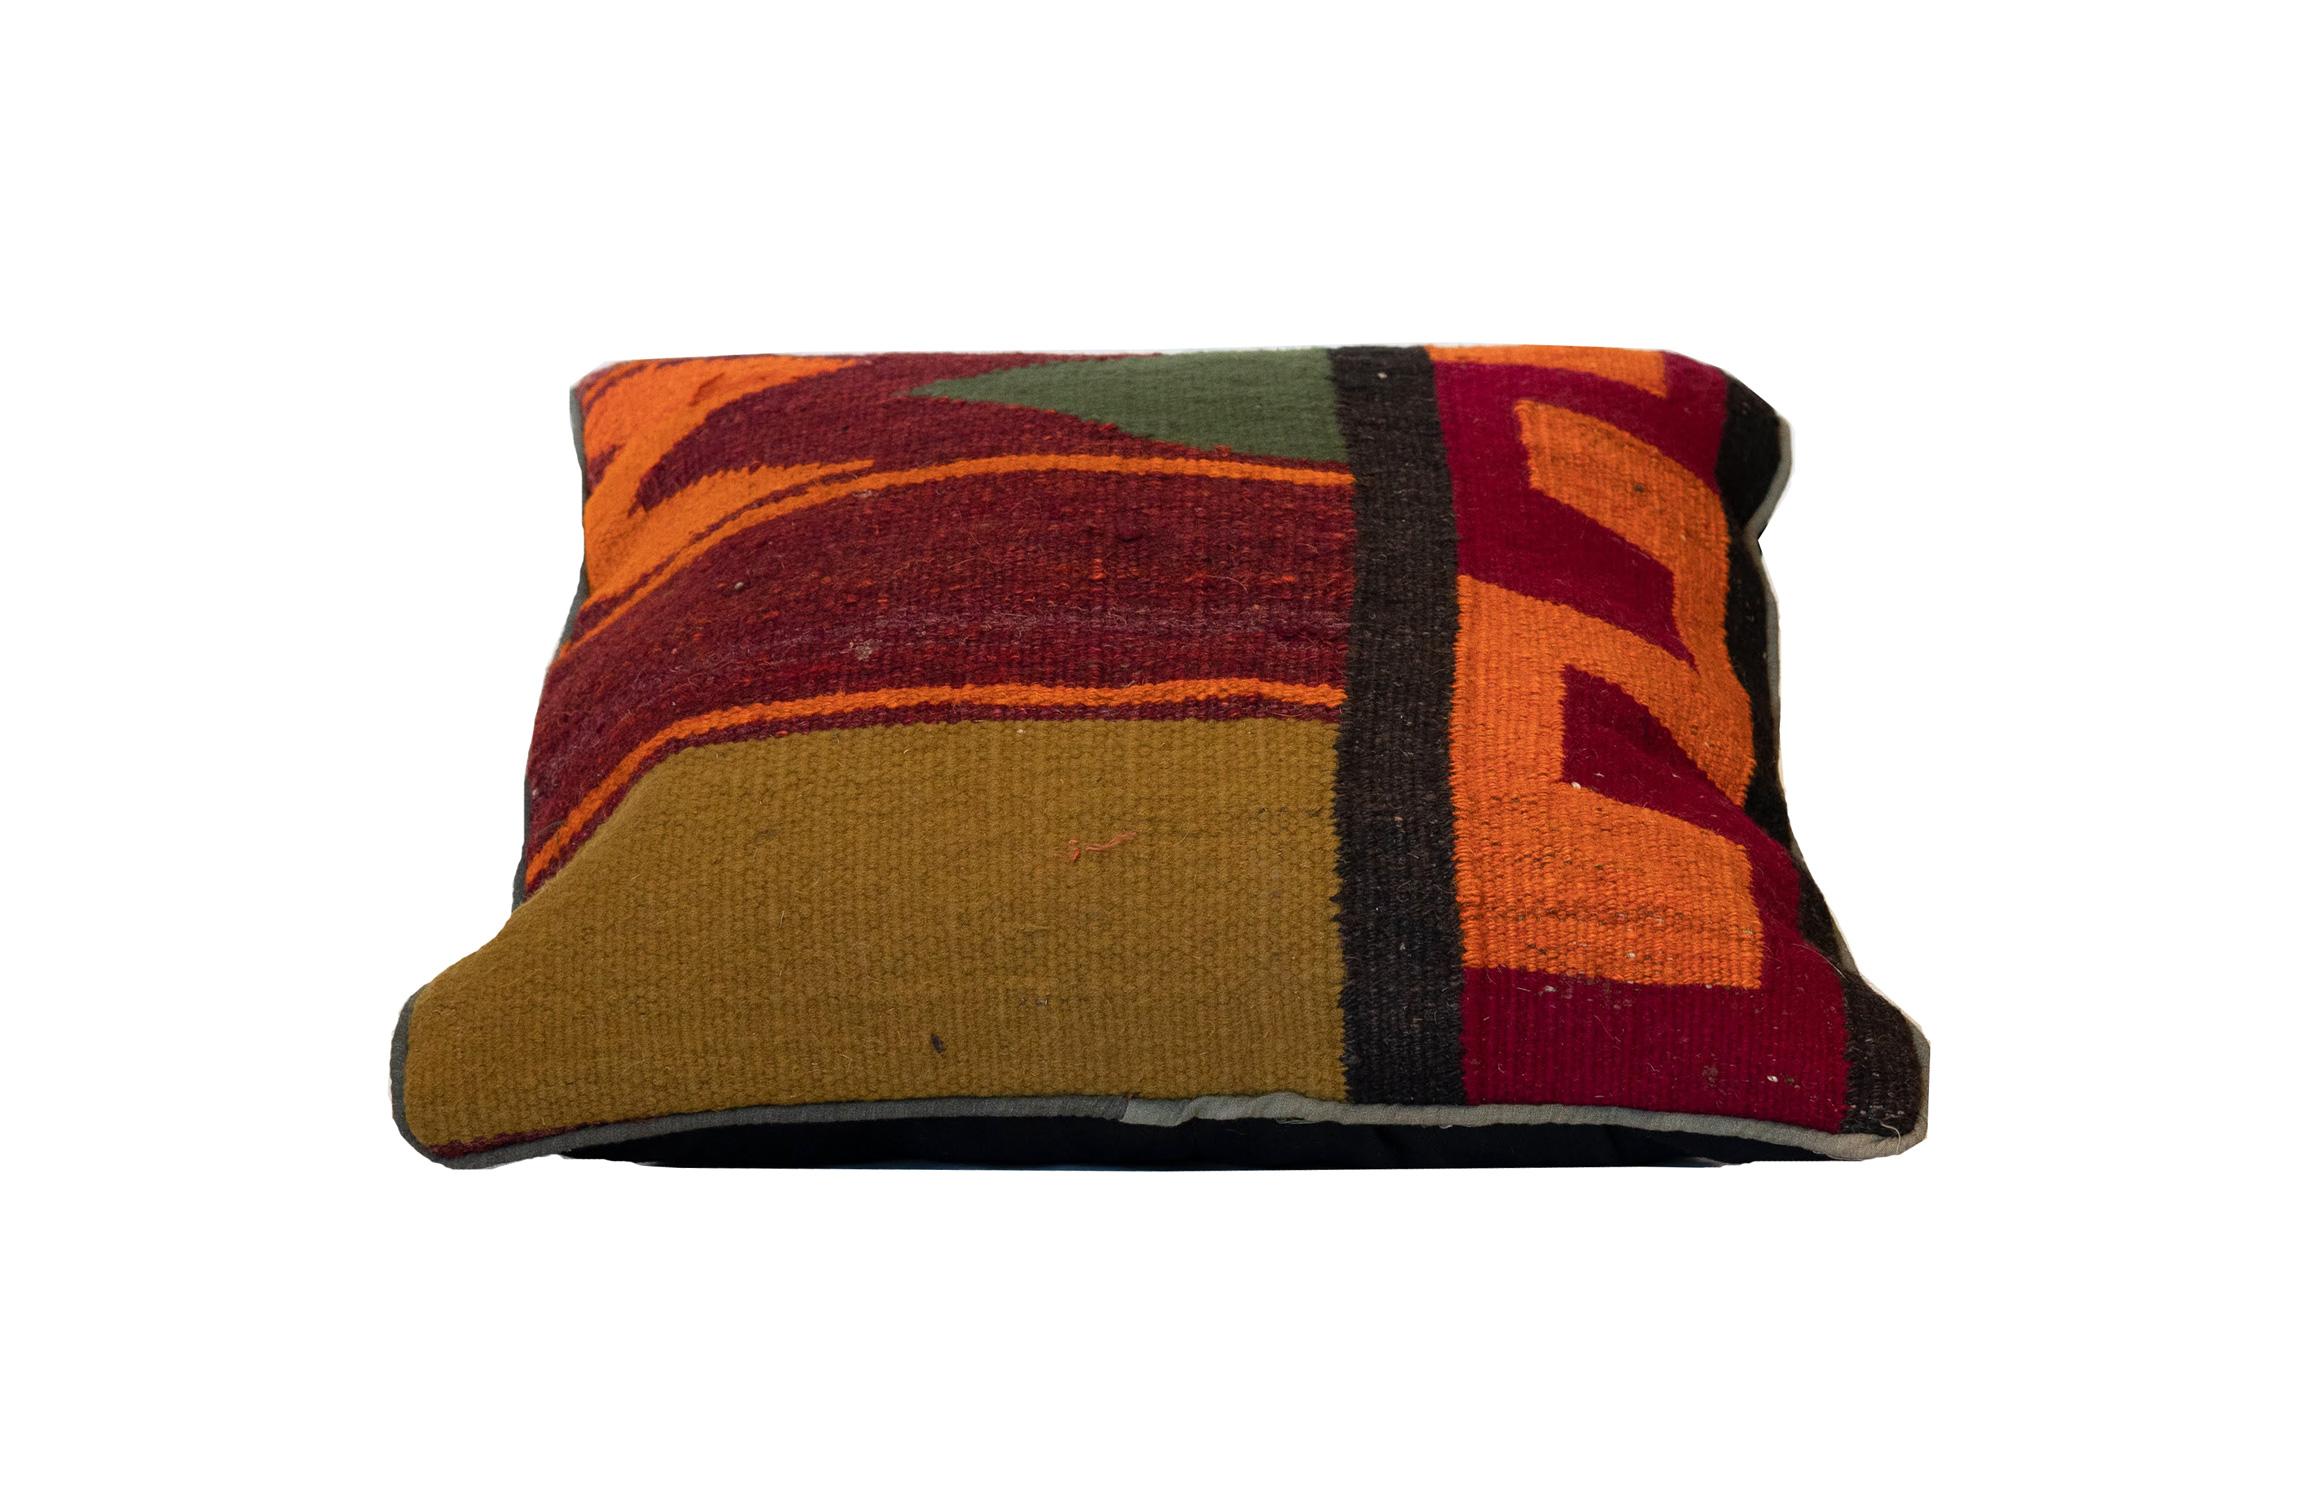 Using the conventional Kilim, flat-weave technique, this traditional vibrant Kilim cushion cover has been handwoven with hand-spun wool. This fantastic piece features an abstract geometric design, including zig-zags and striped woven in a deep